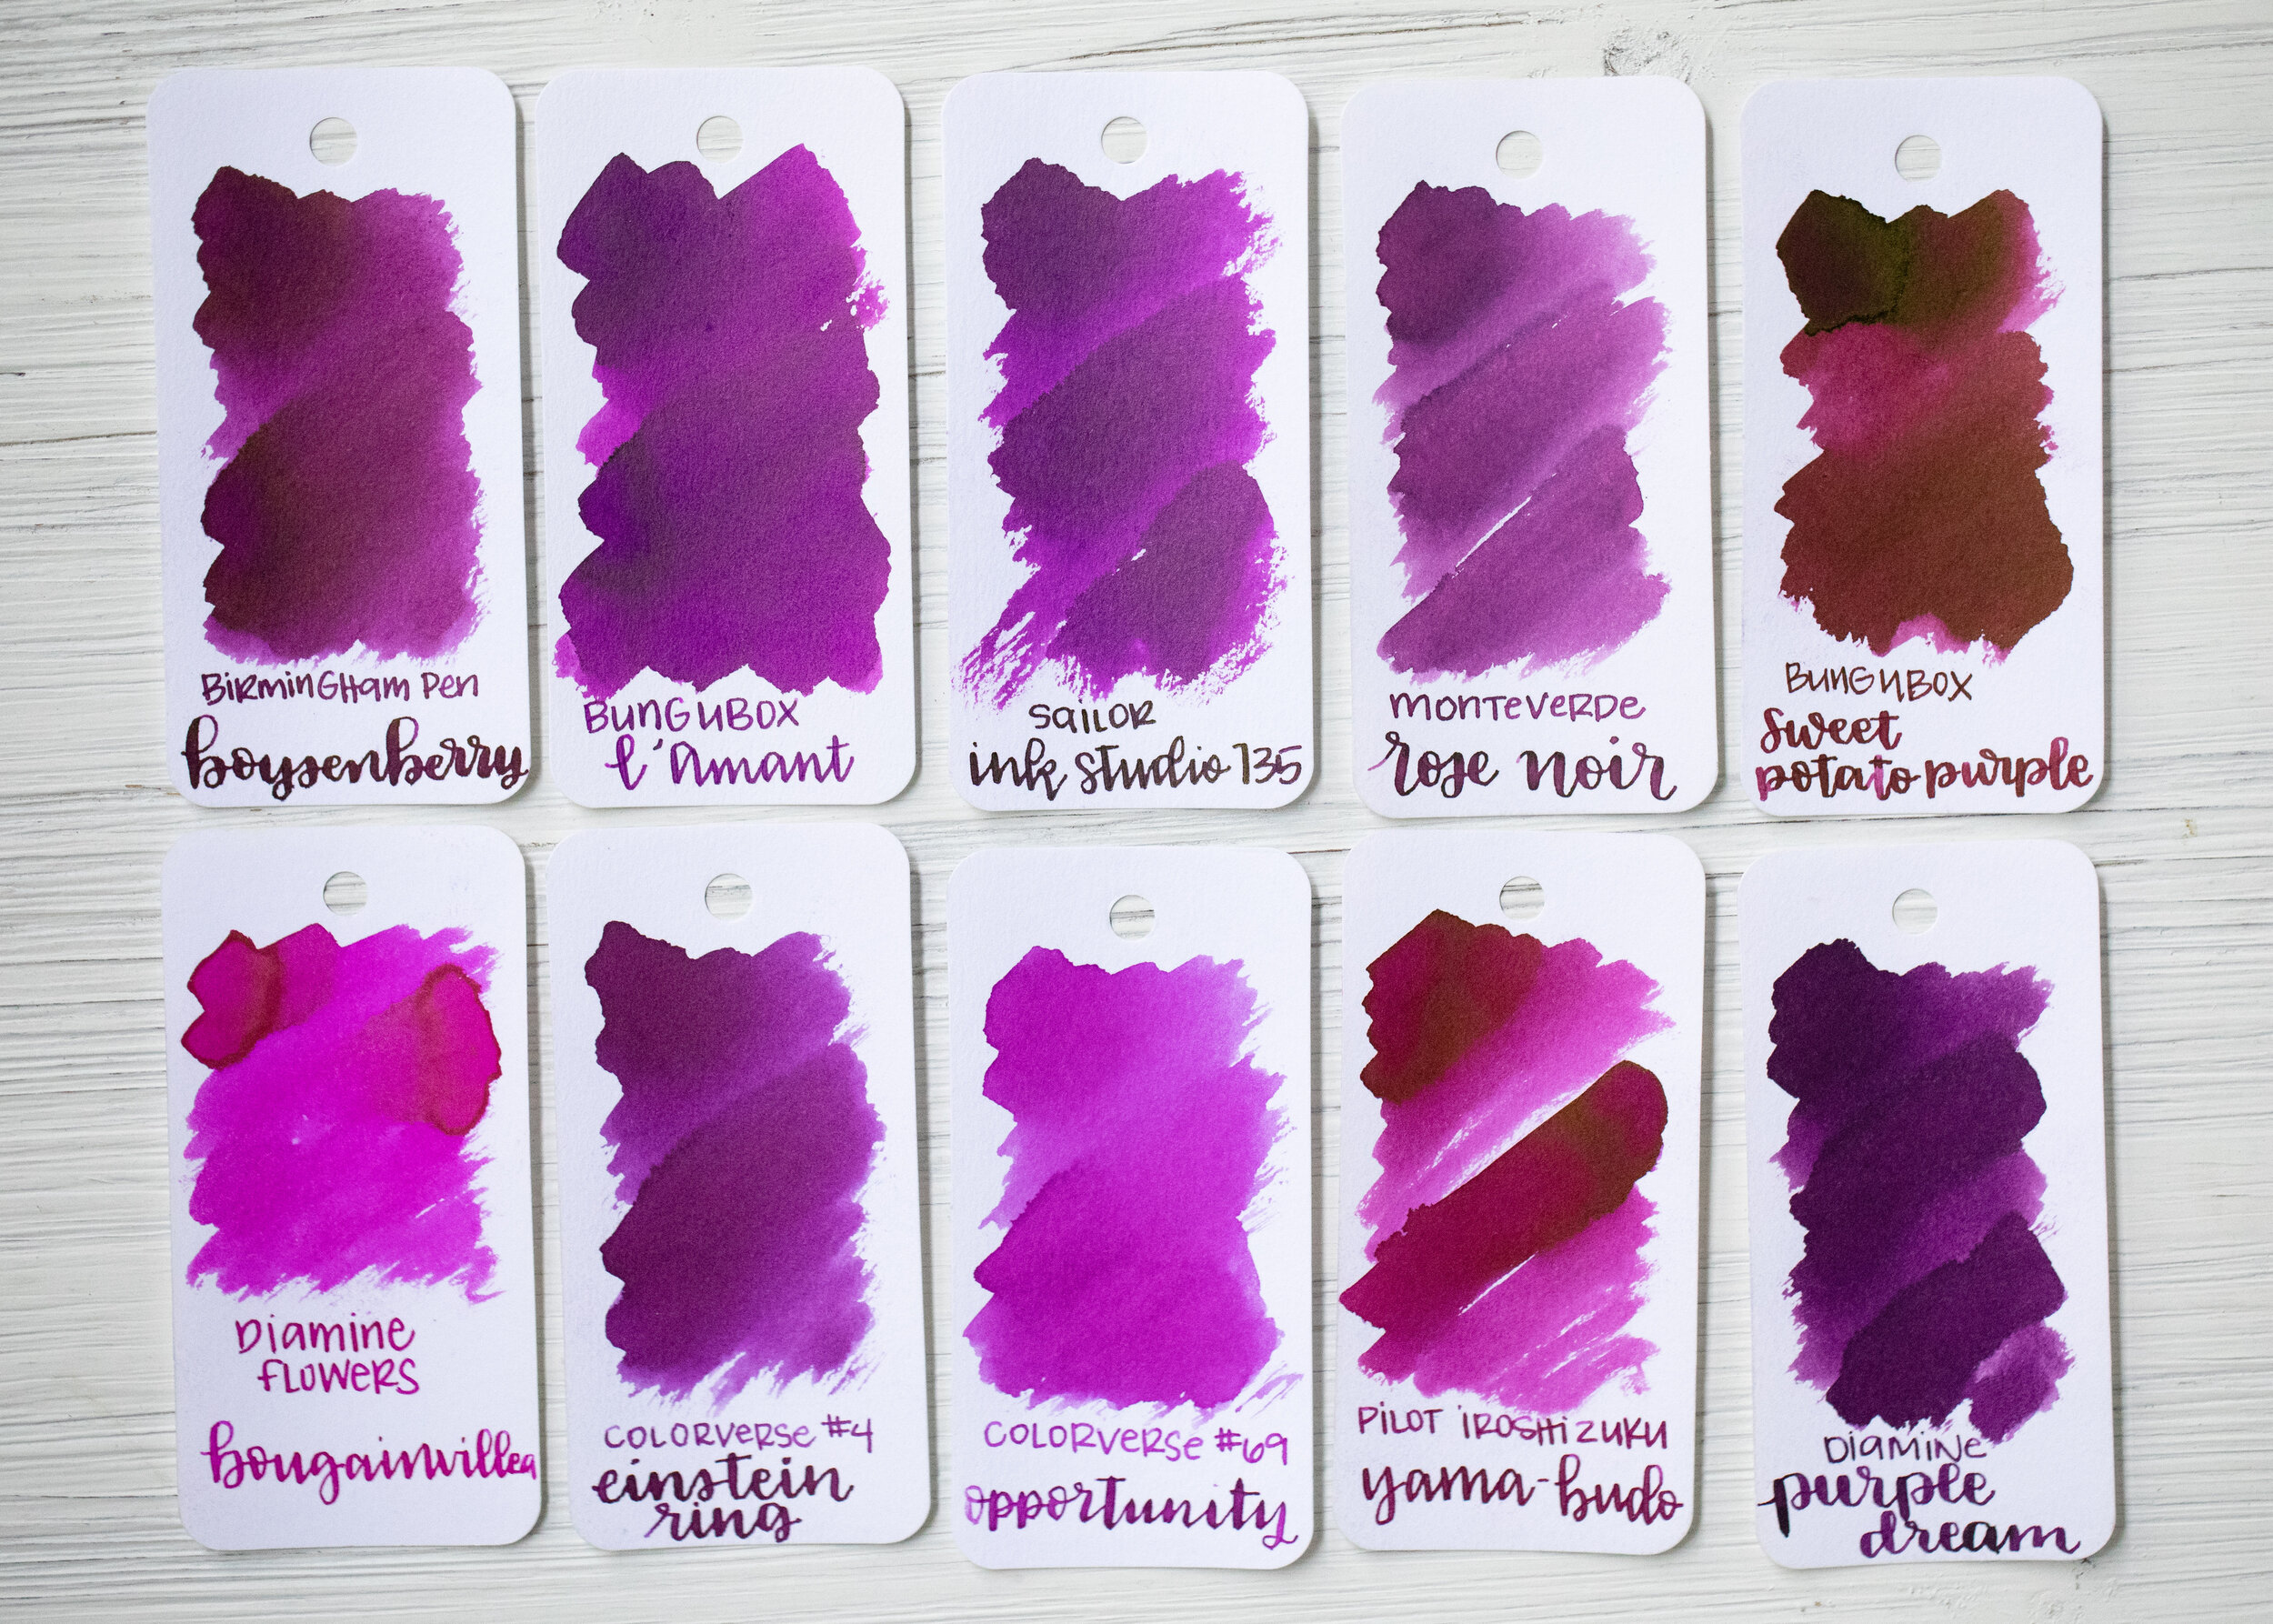 Ink Review #510: Bungubox Ebisu Gold — Mountain of Ink